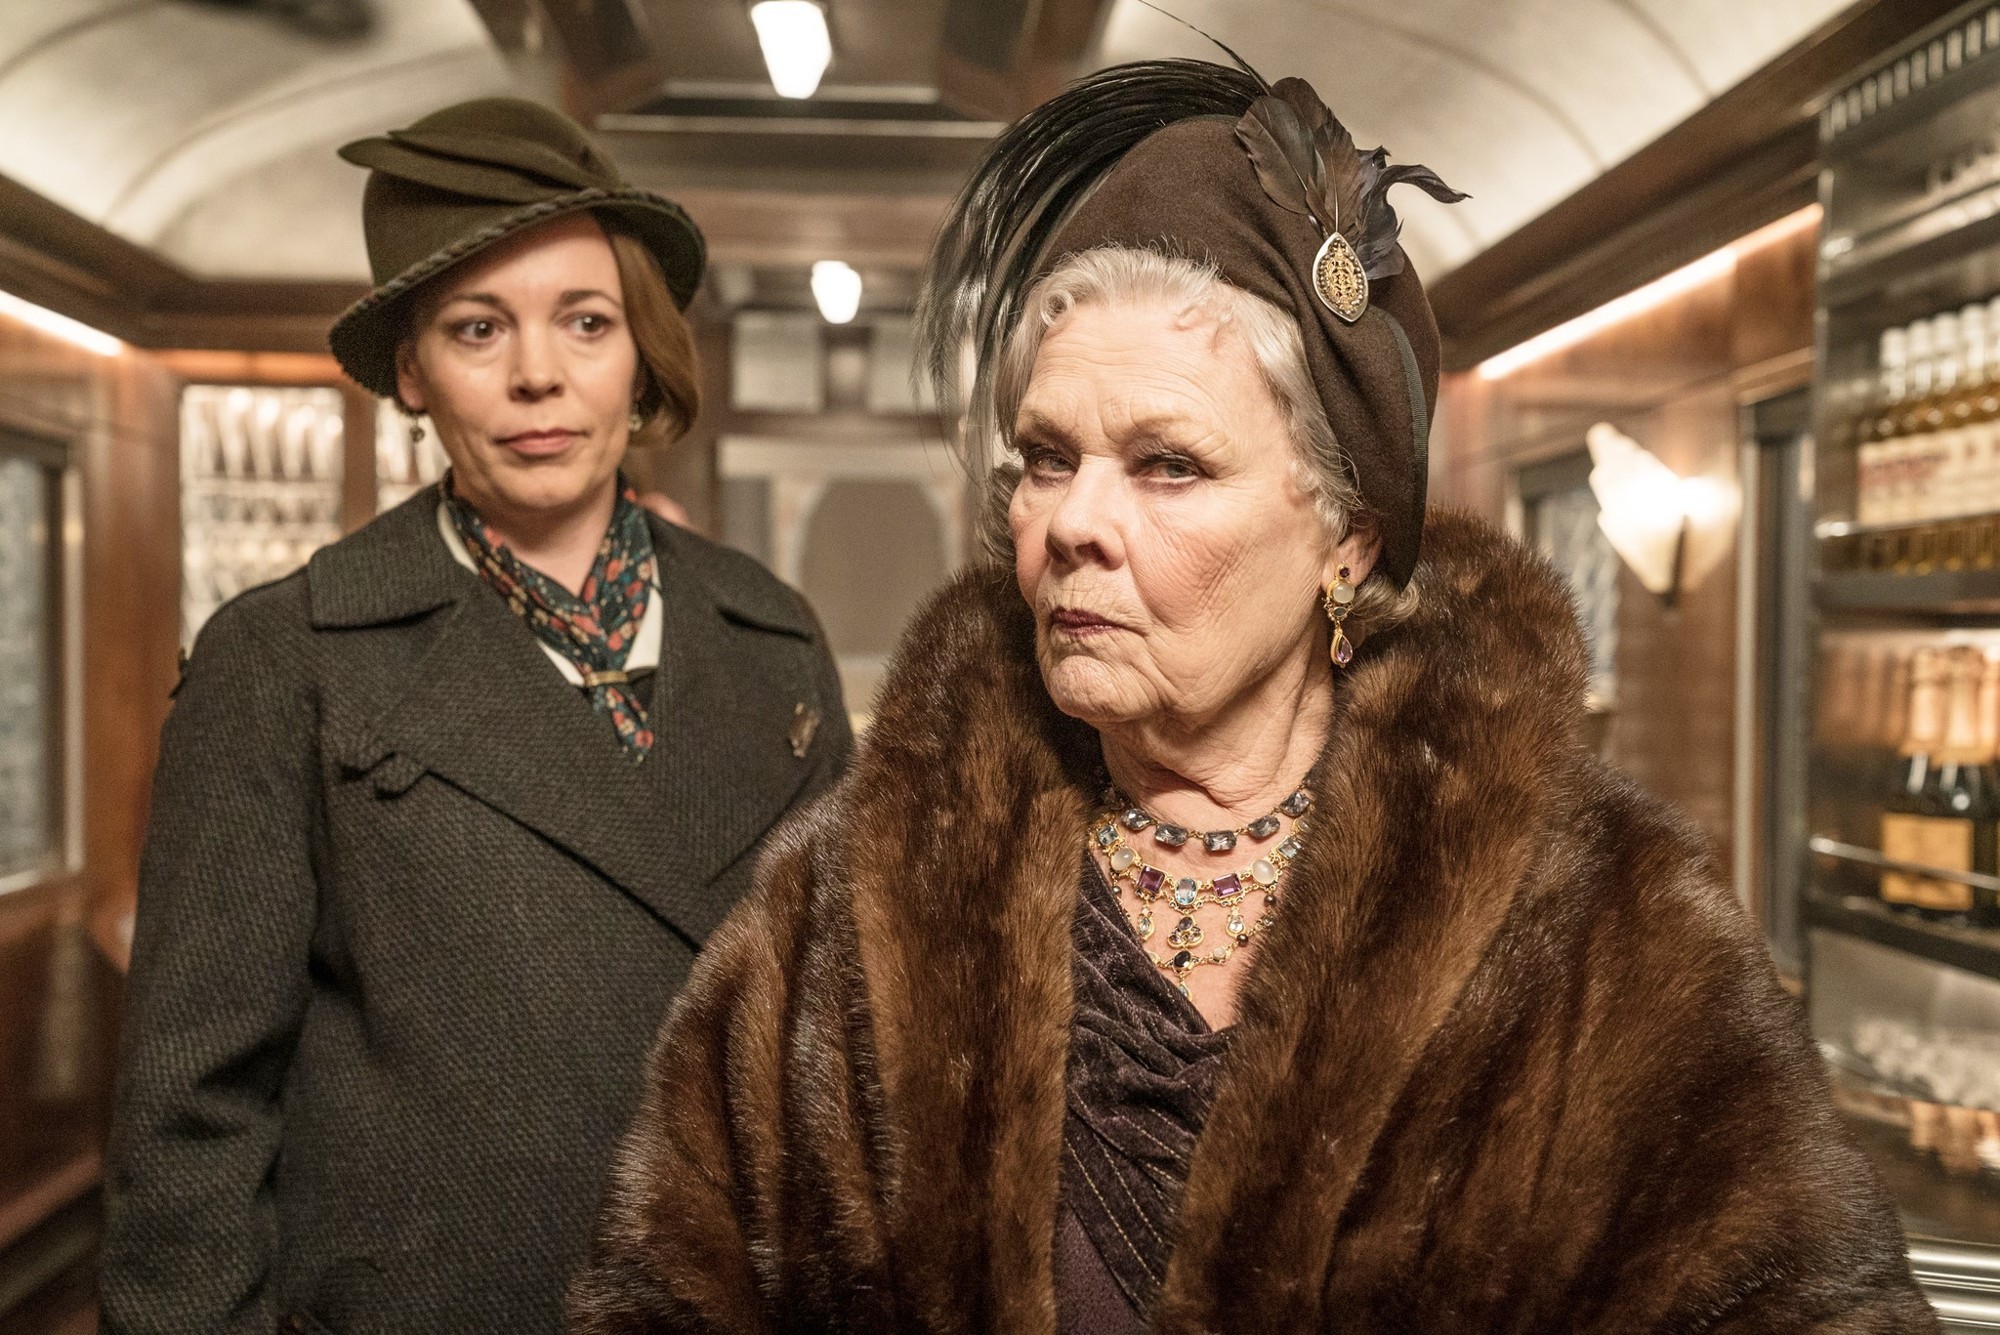 Olivia Colman stars as Hildegarde Schmidt and Judi Dench stars as Princess Dragomiroff in 20th Century Fox's Murder on the Orient Express (2017)